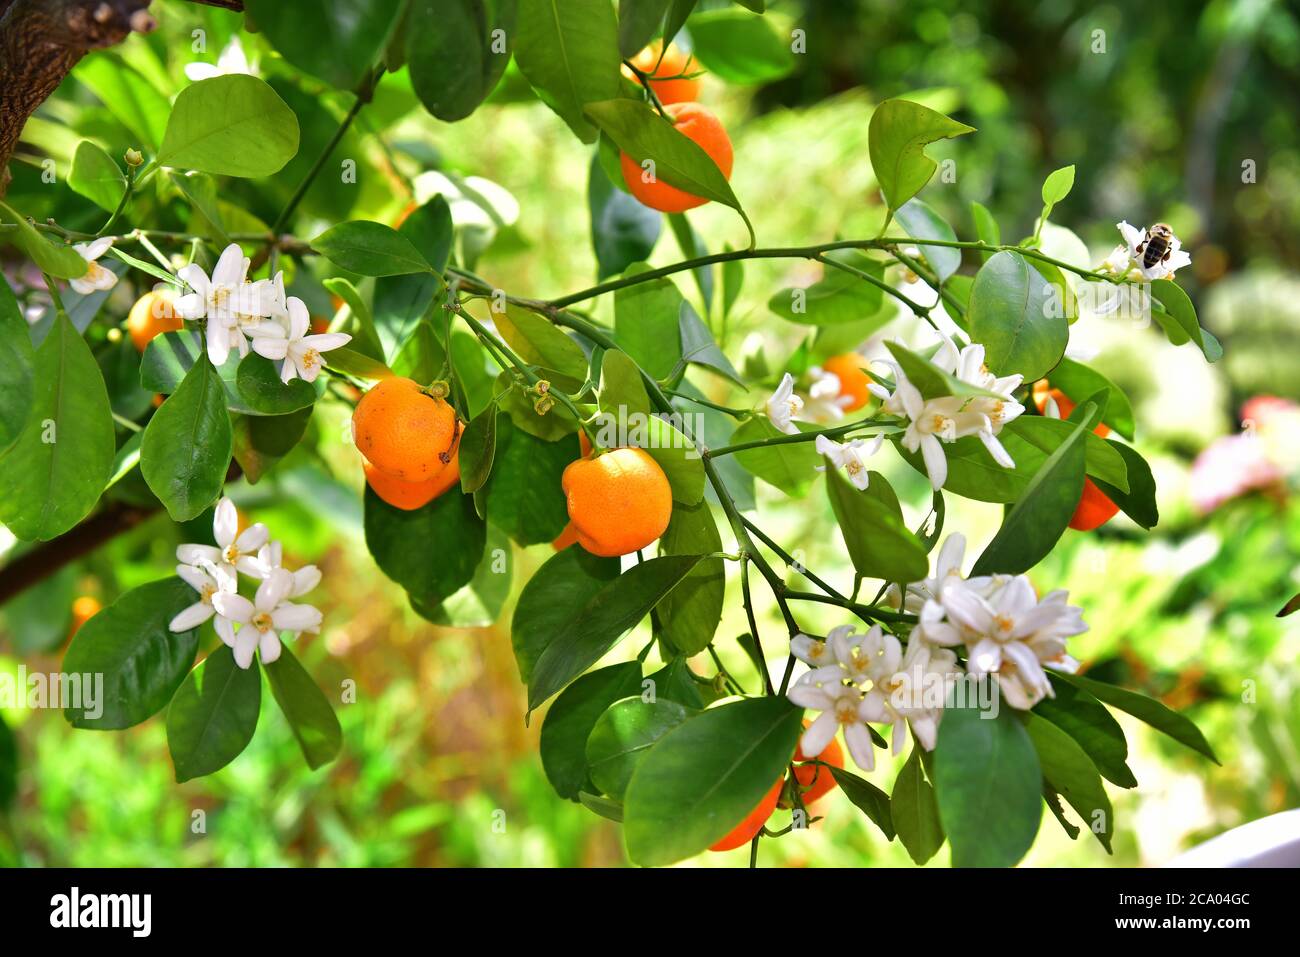 Tangerine Citrus Reticulata With Flowers And Fruits Stock Photo Alamy